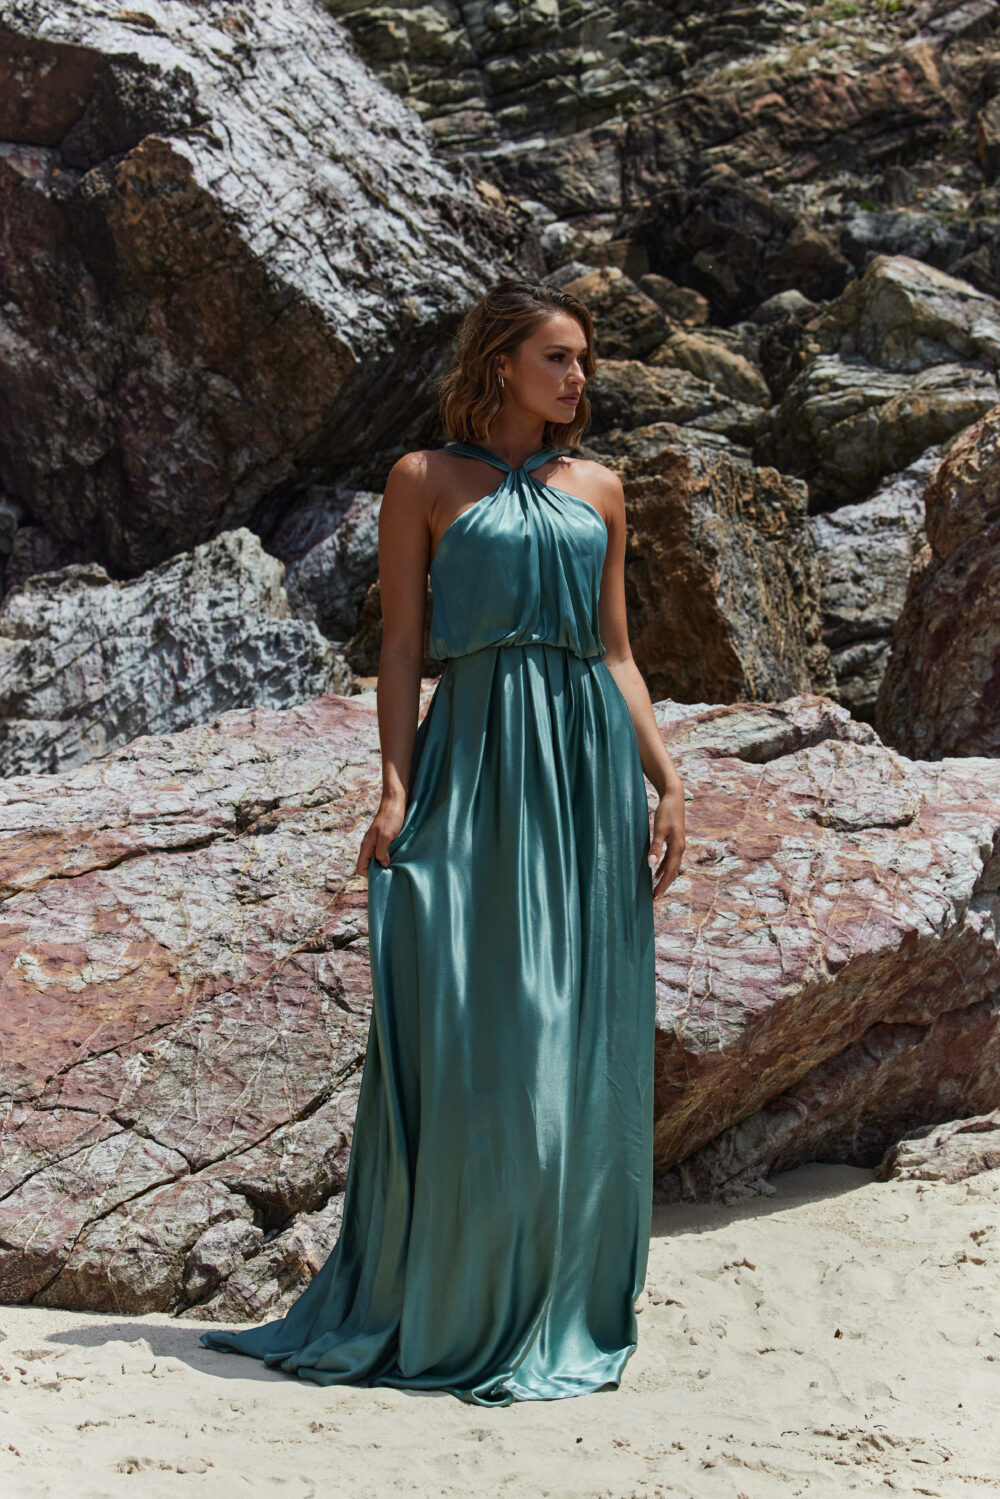 BLOOM TO886 Rever dress by Tania Olsen Designs